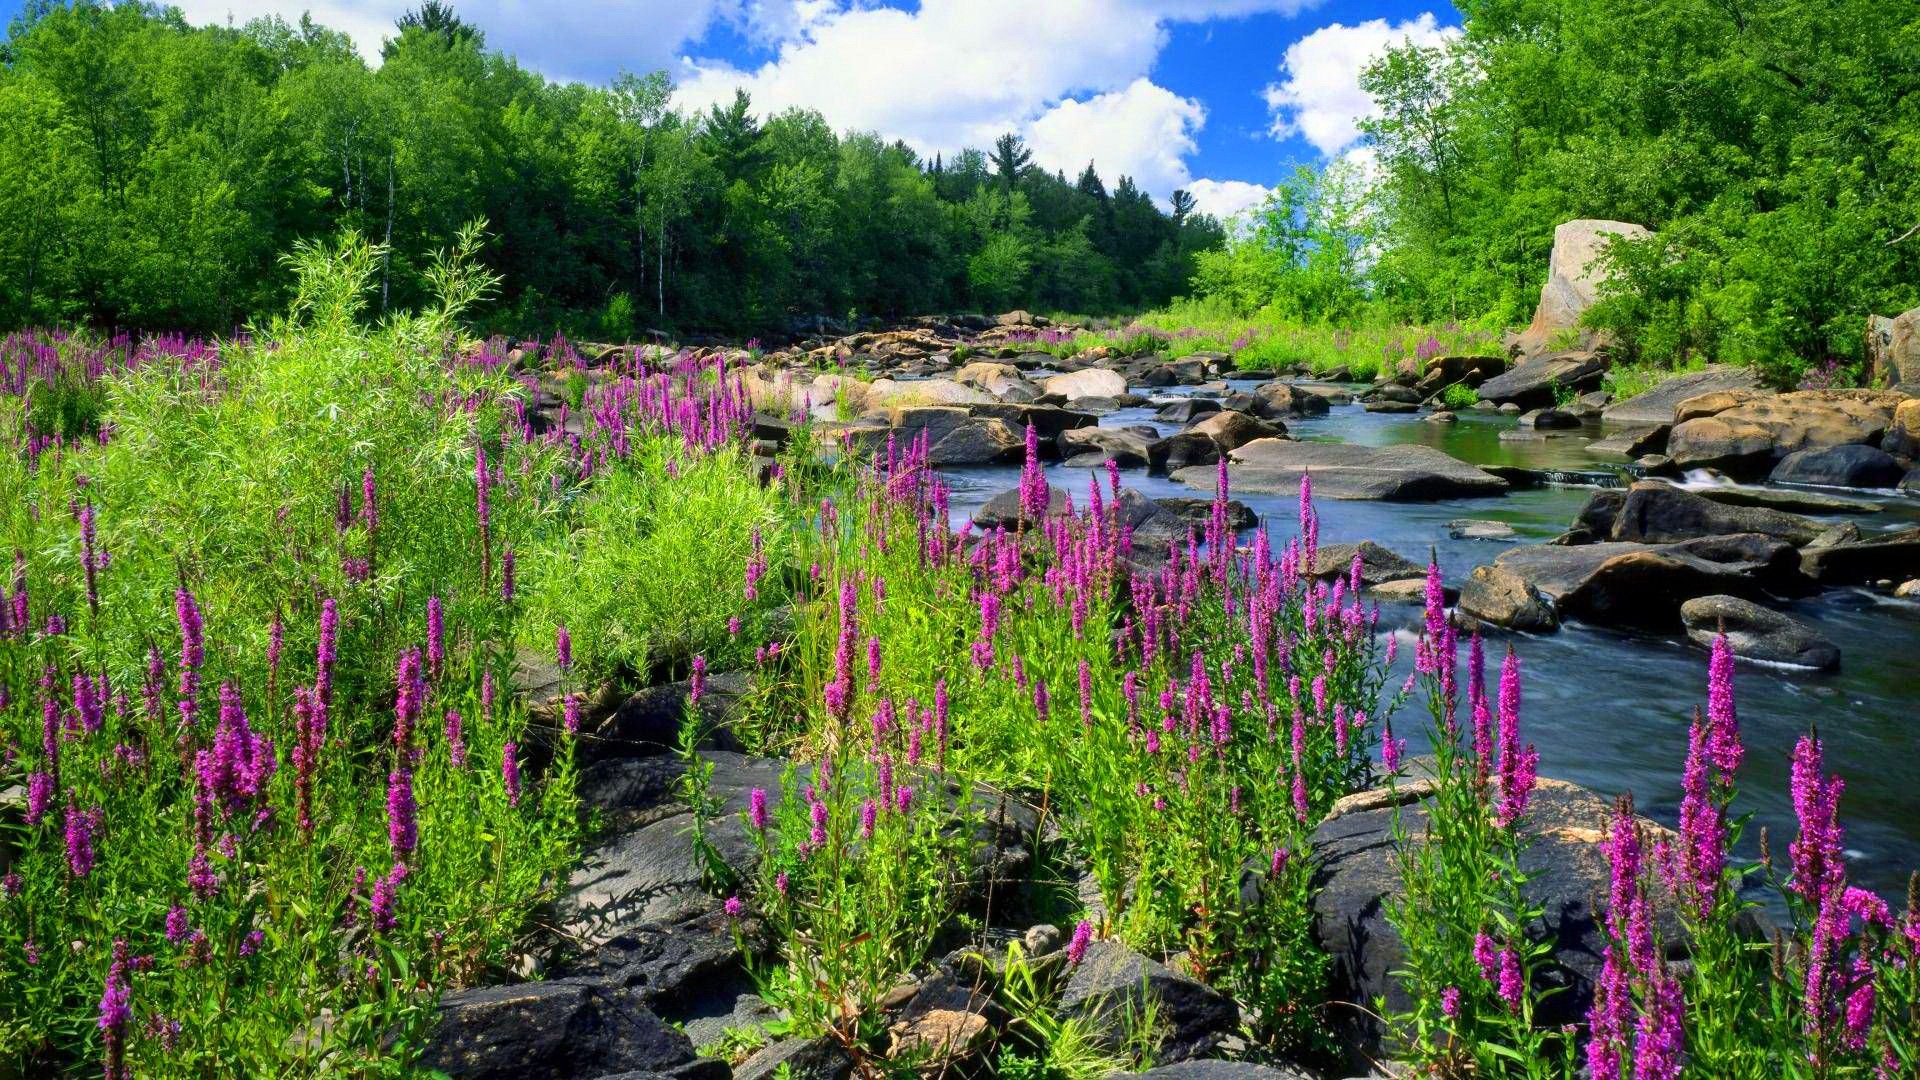 Mountain River Stone Forest Trees With Green Purple Flowers Of